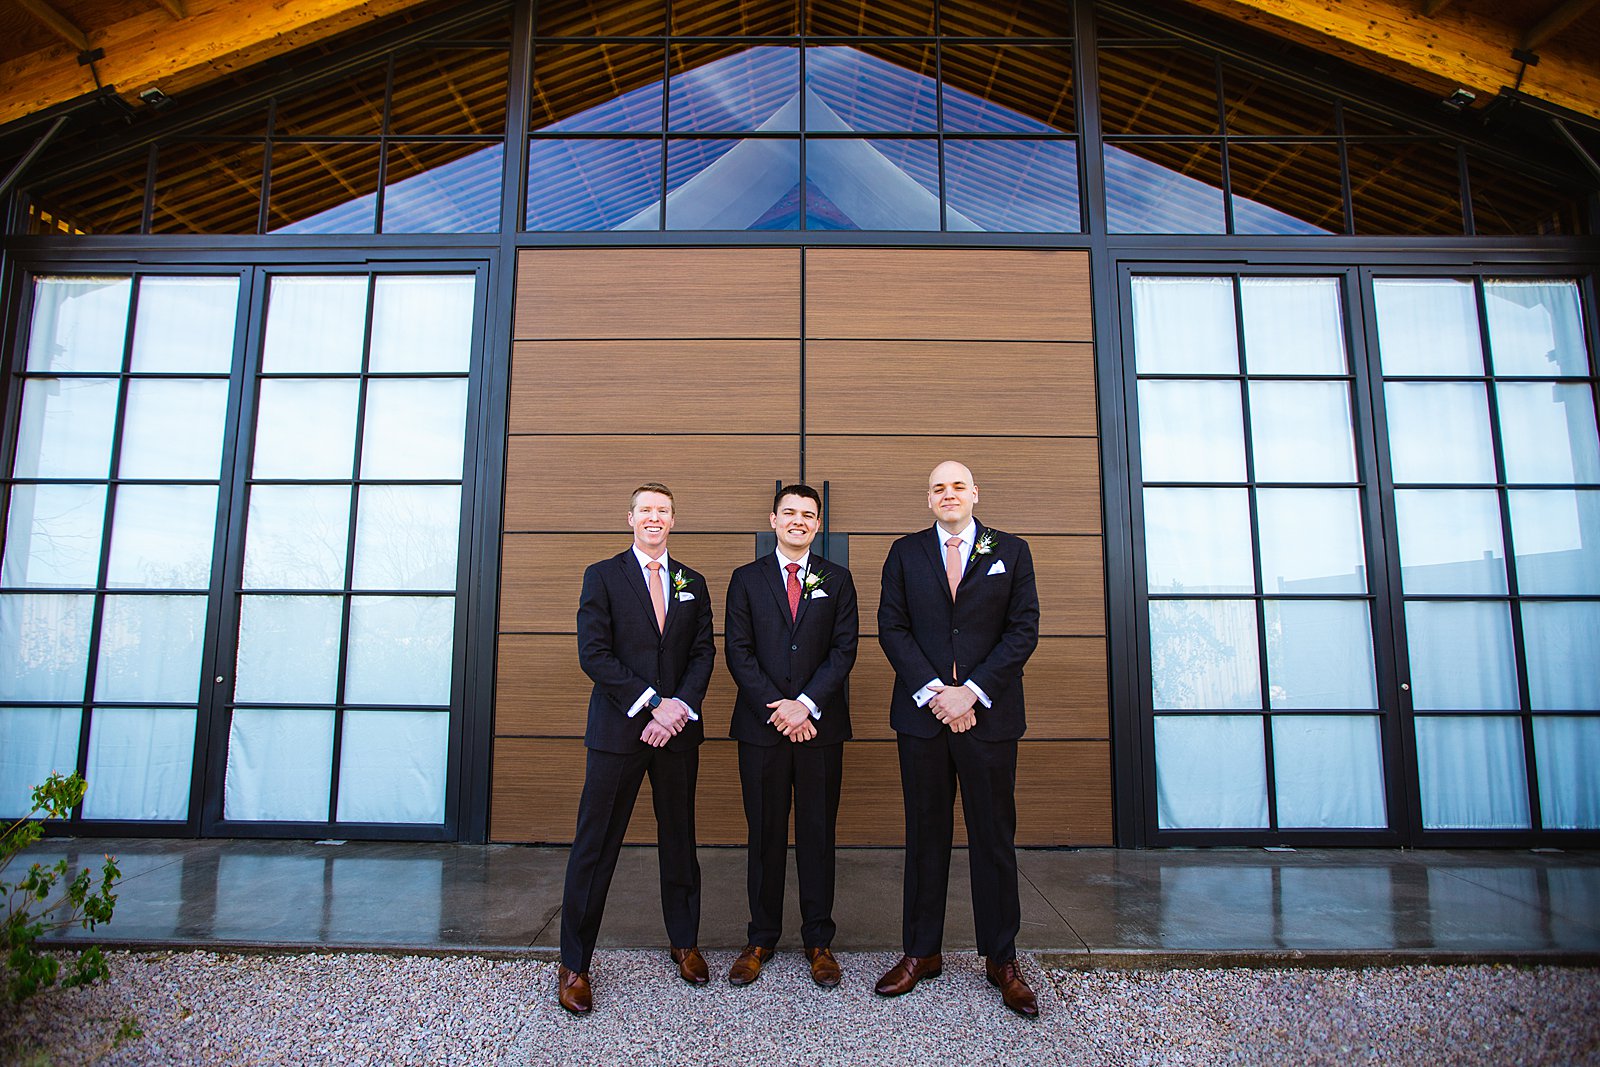 Groom and groomsmen together at a The Paseo wedding by Arizona wedding photographer PMA Photography.